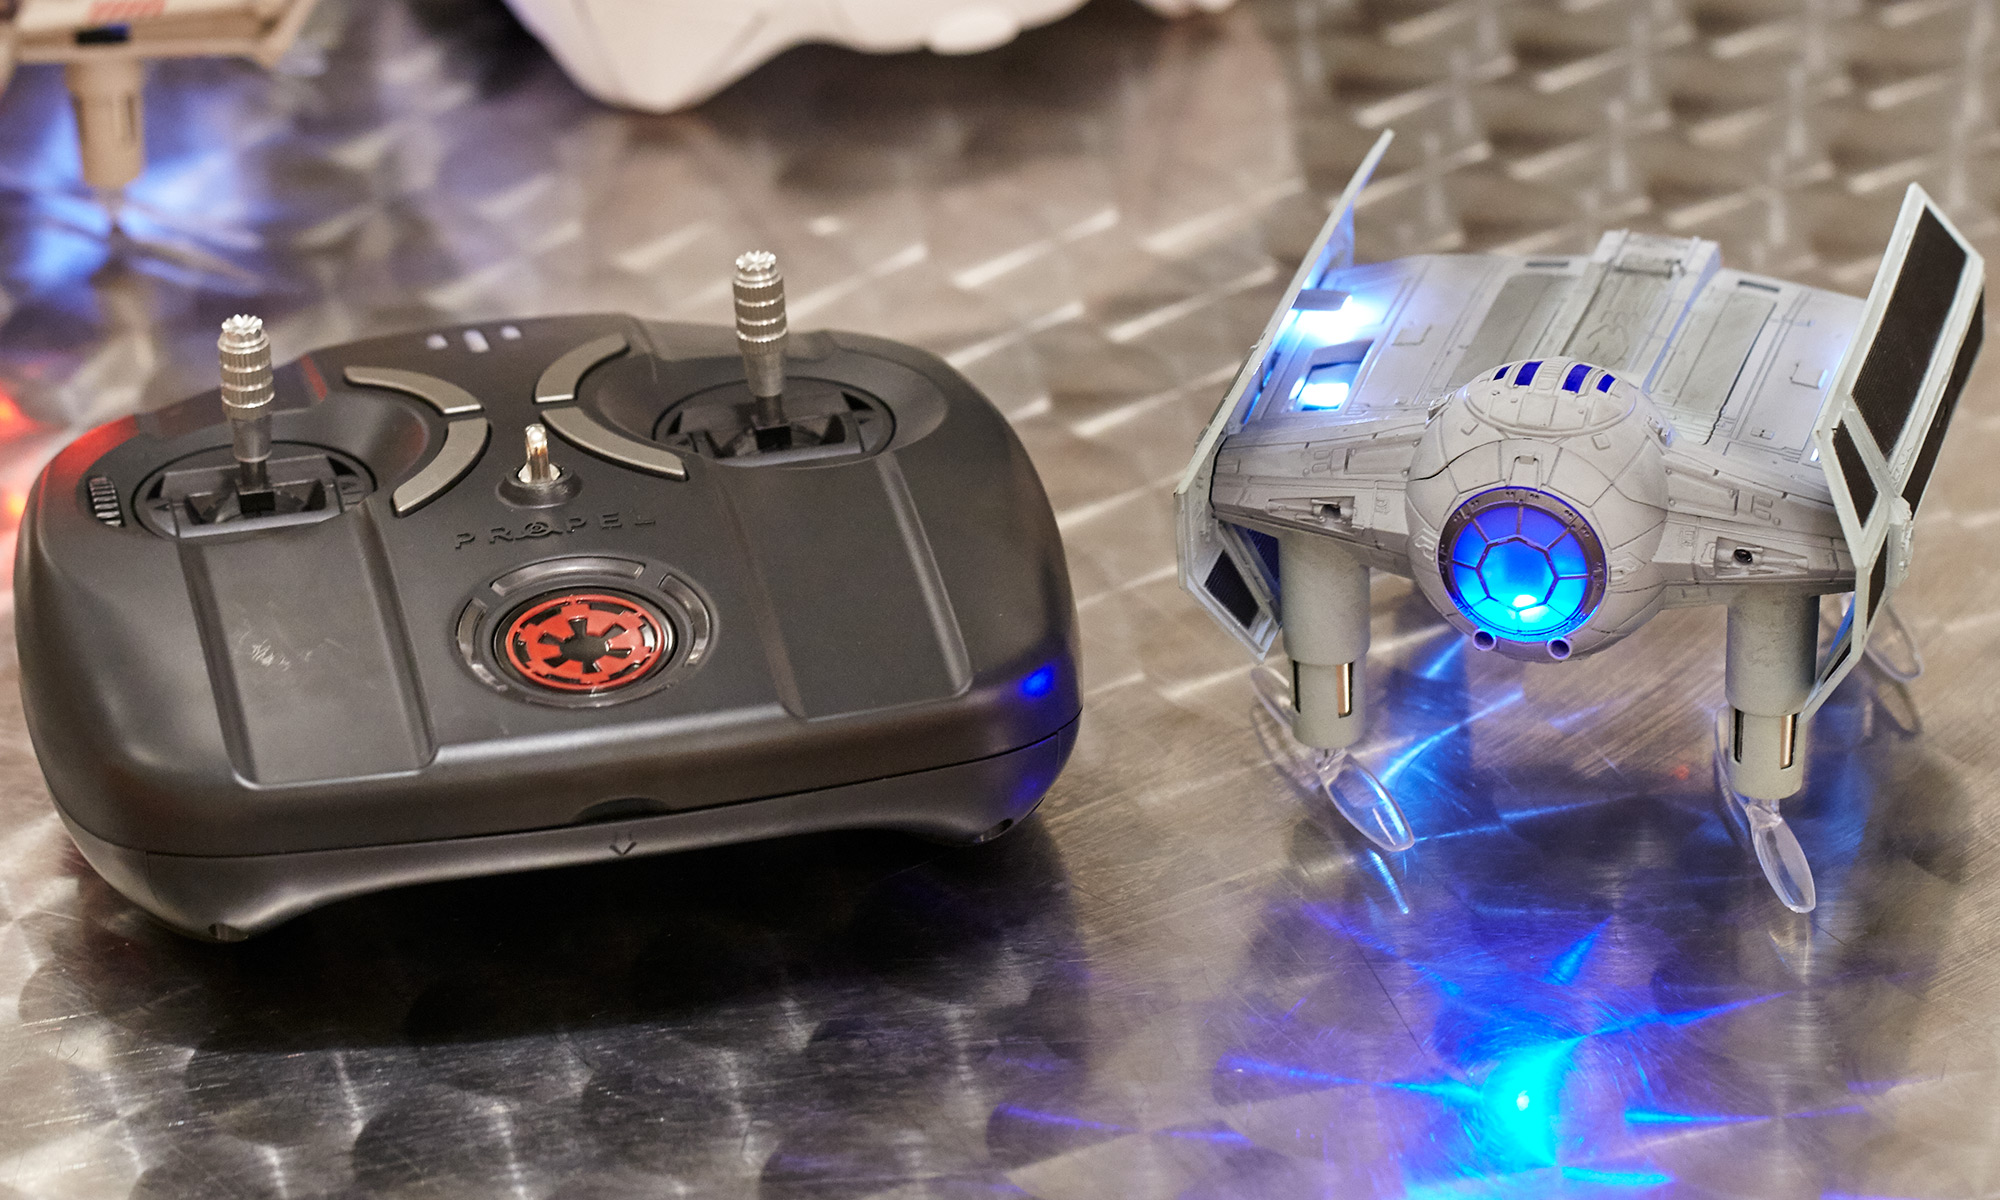 Cater sammensmeltning uformel Propel Star Wars Drone Review: The Drones You're Looking For | Tom's Guide